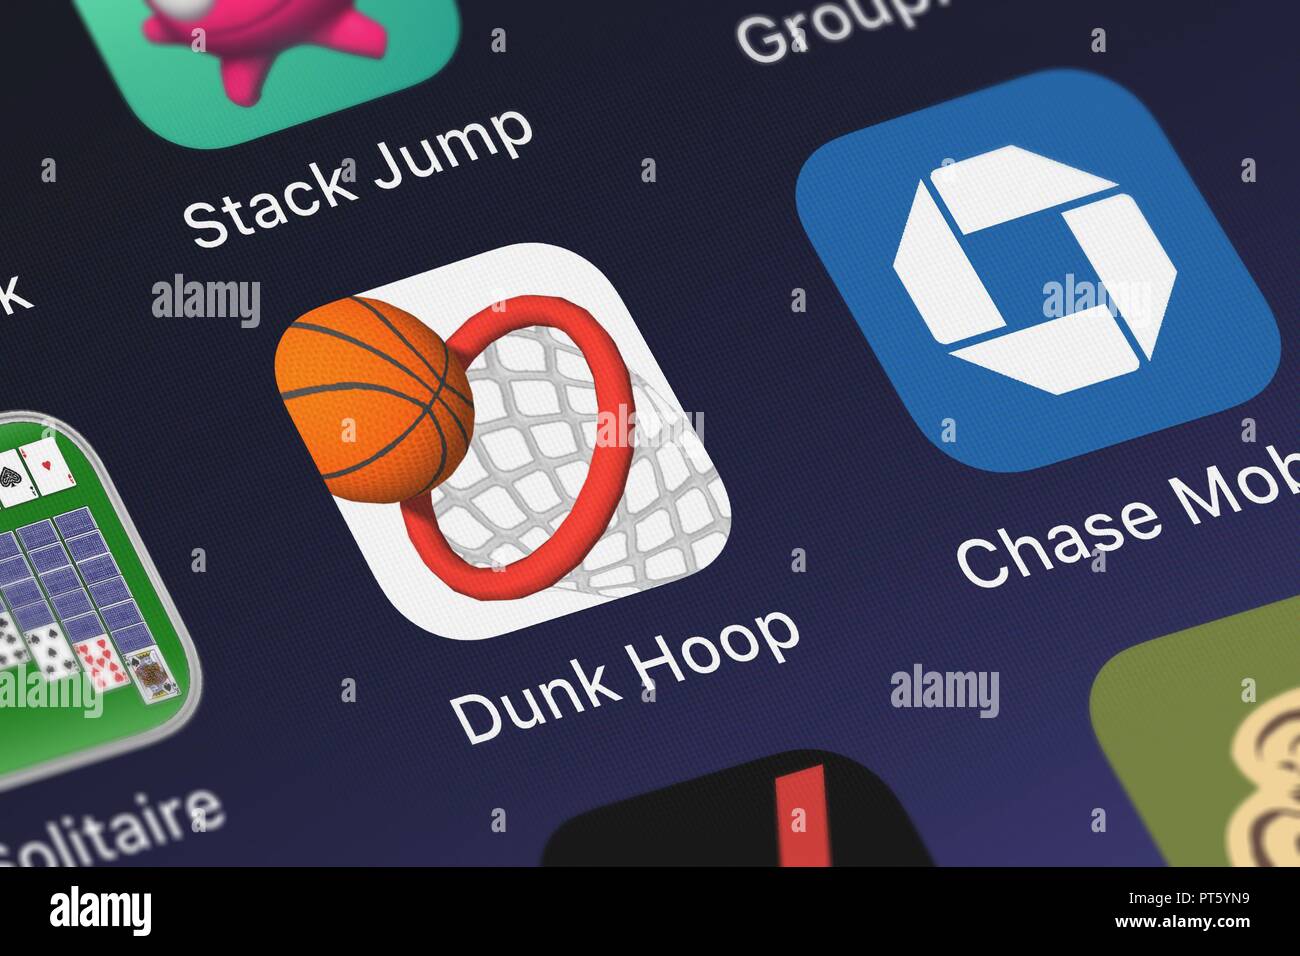 London, United Kingdom - October 06, 2018: The Dunk Hoop mobile app from Ketchapp on an iPhone screen. Stock Photo